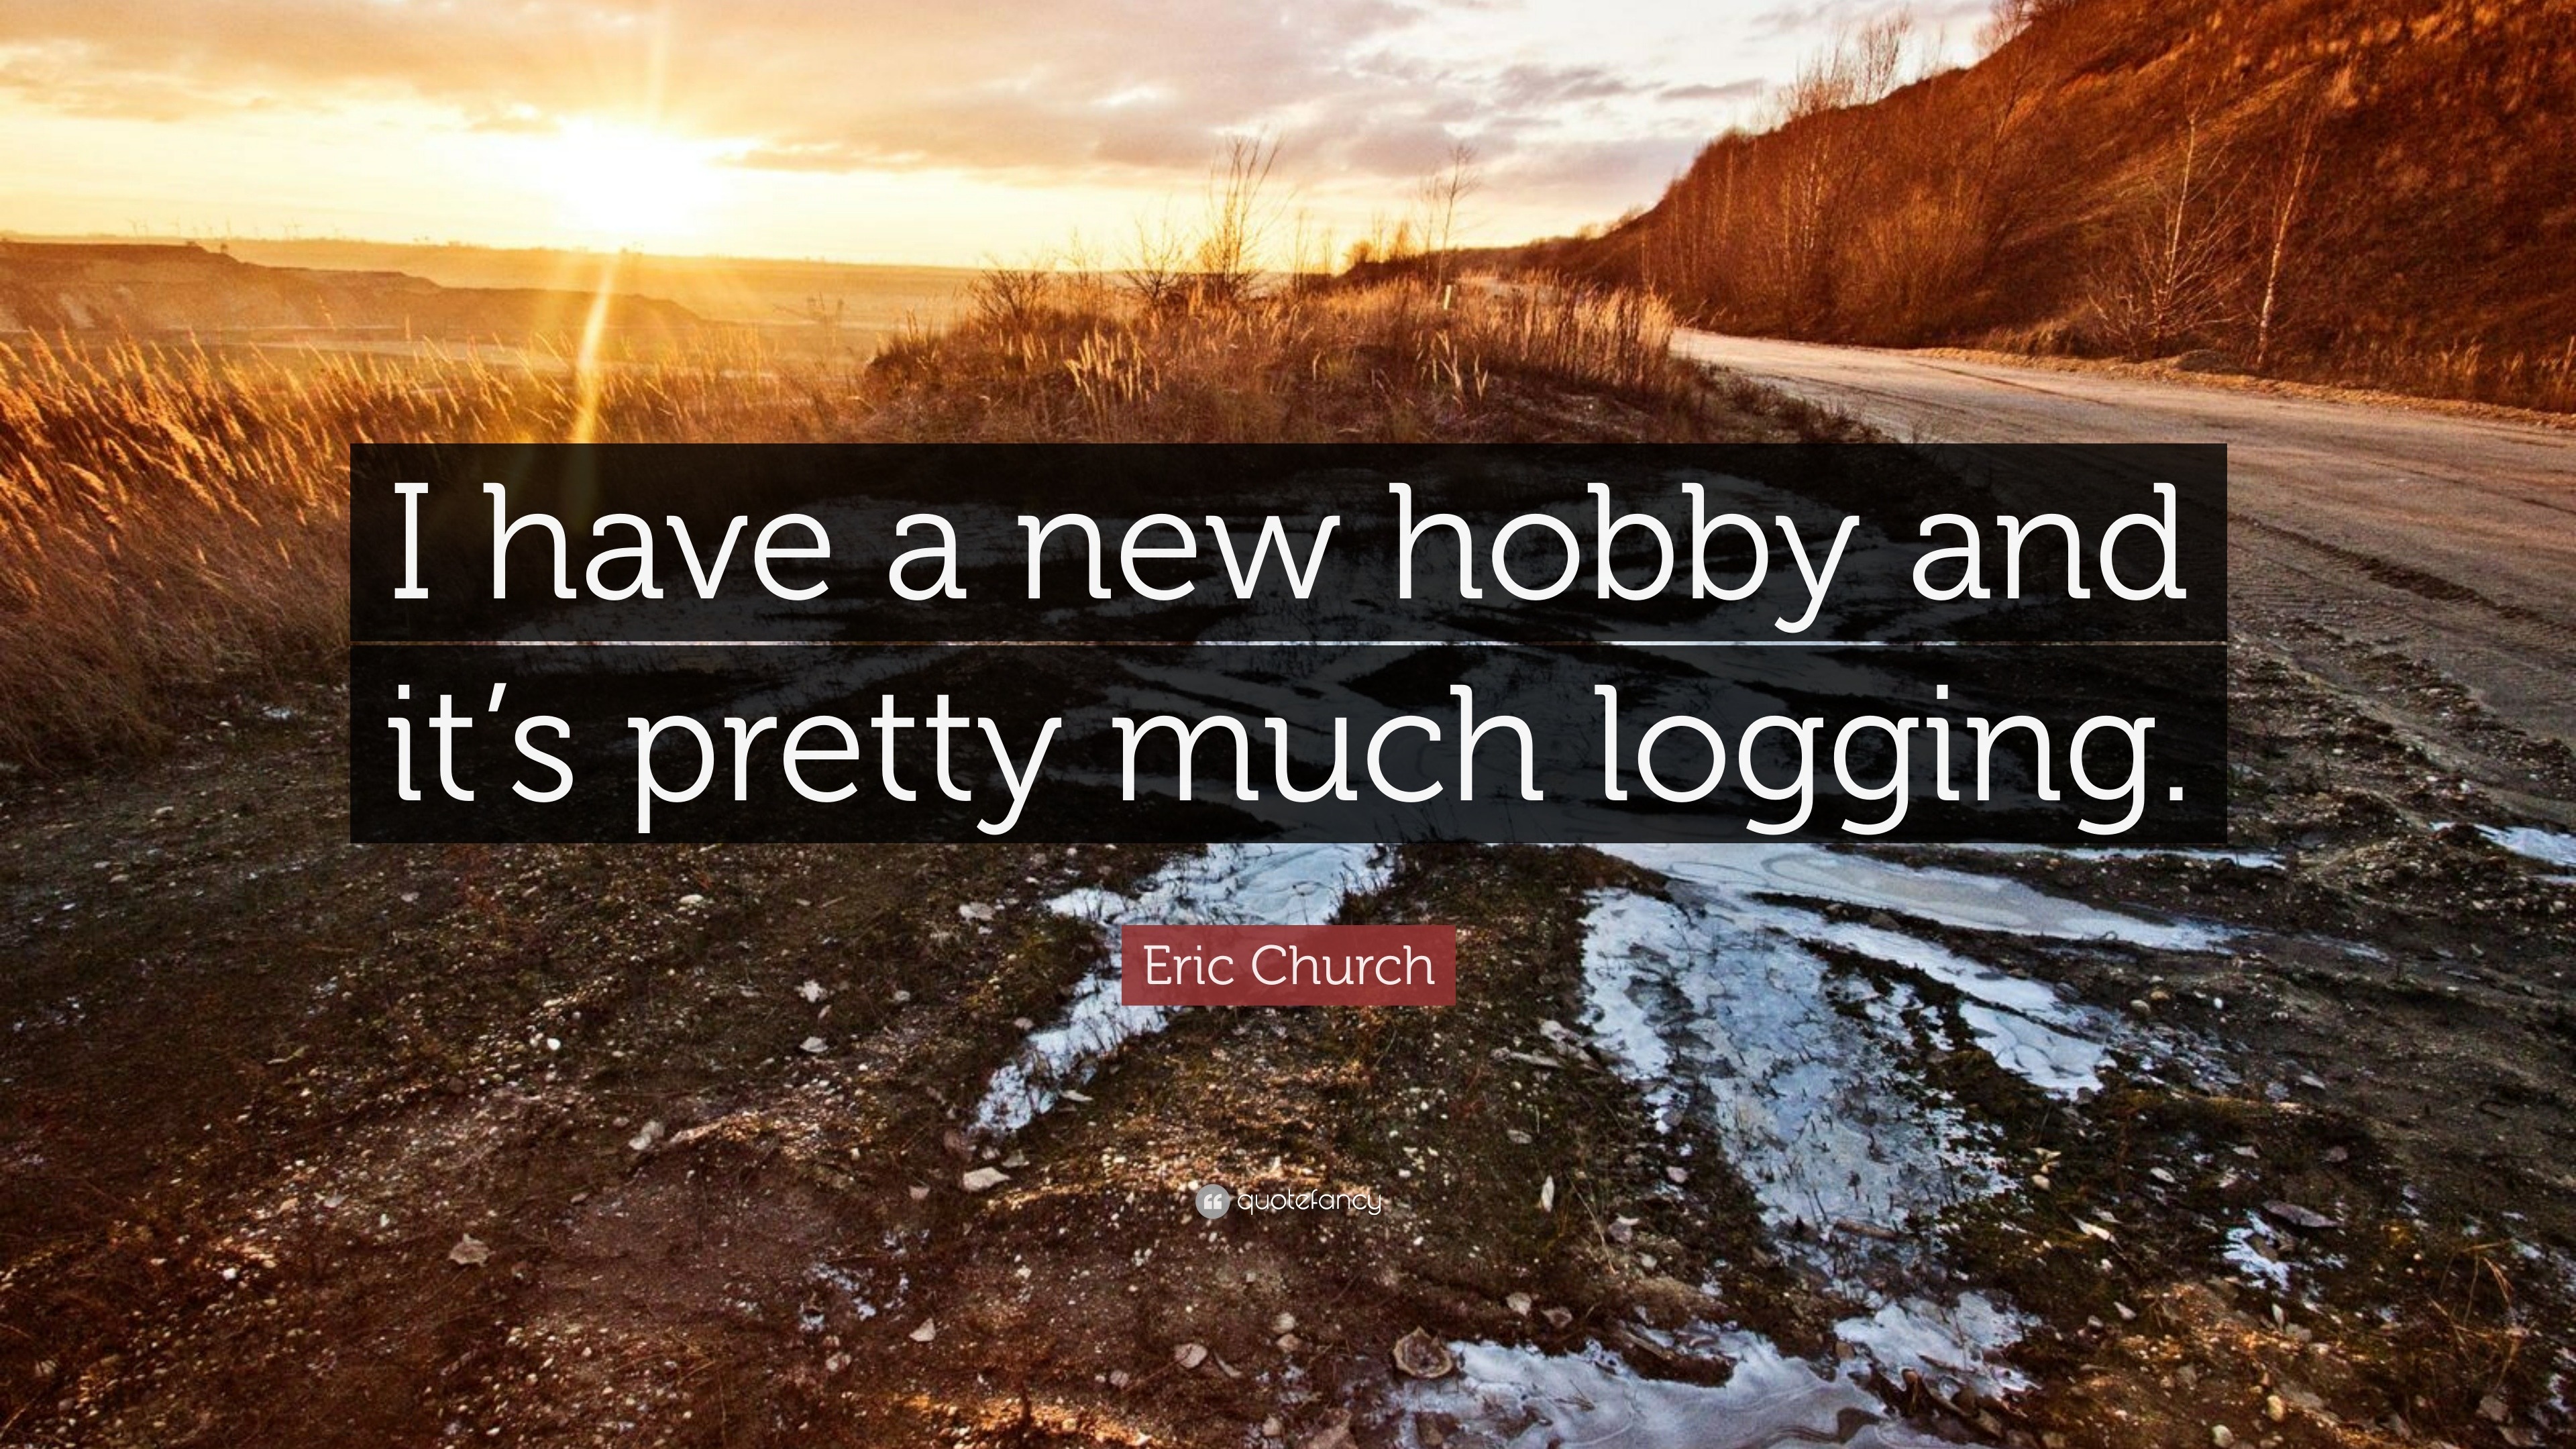 Eric Church Quote: “I have a new hobby and it's pretty much logging.”